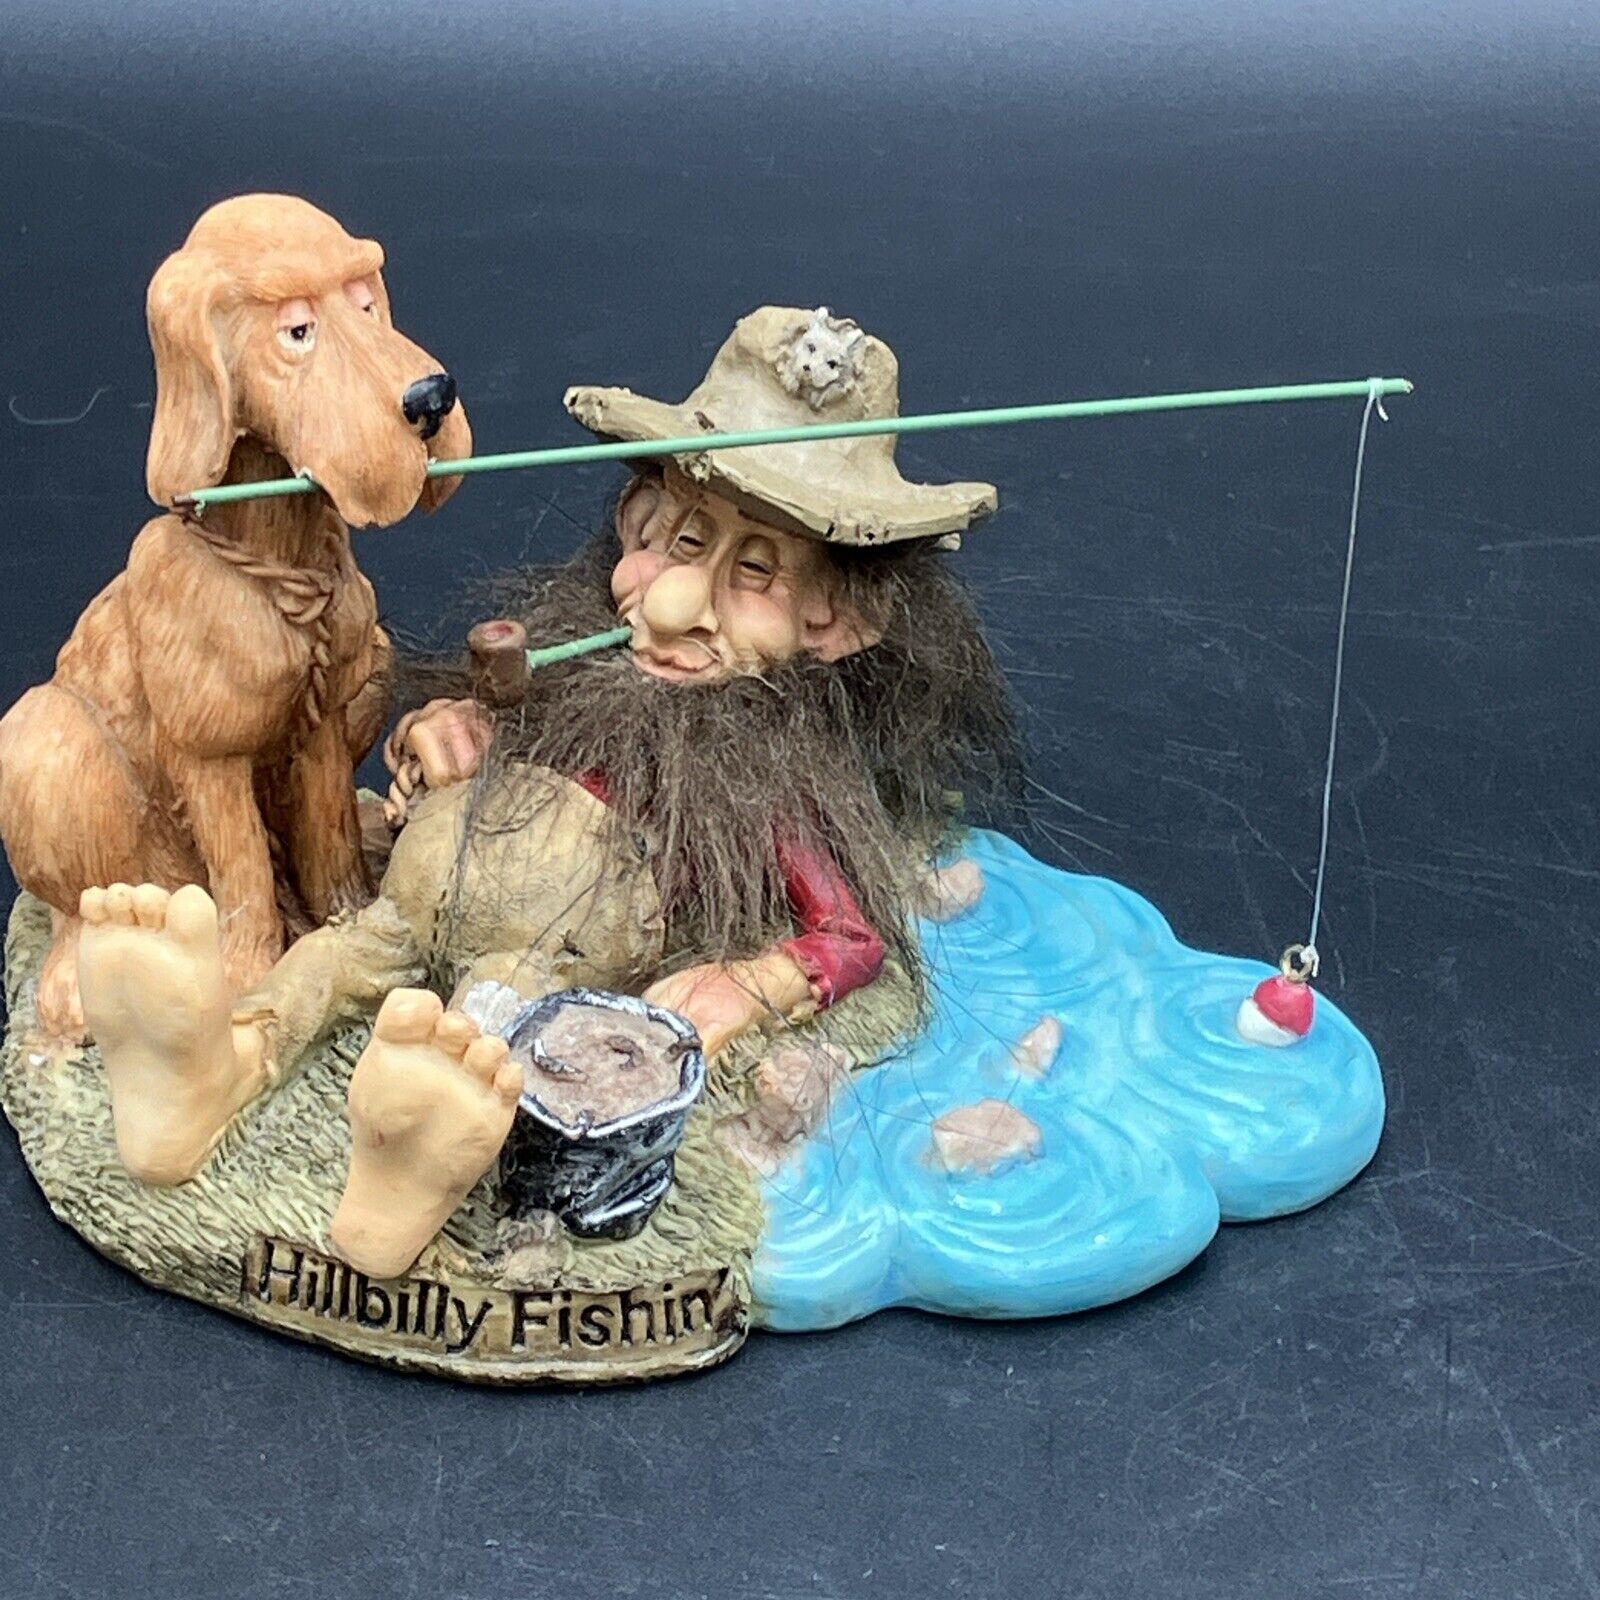 Hillbilly Fishing Statue With Dog.  COLLECTIBLE.  DETAILED.